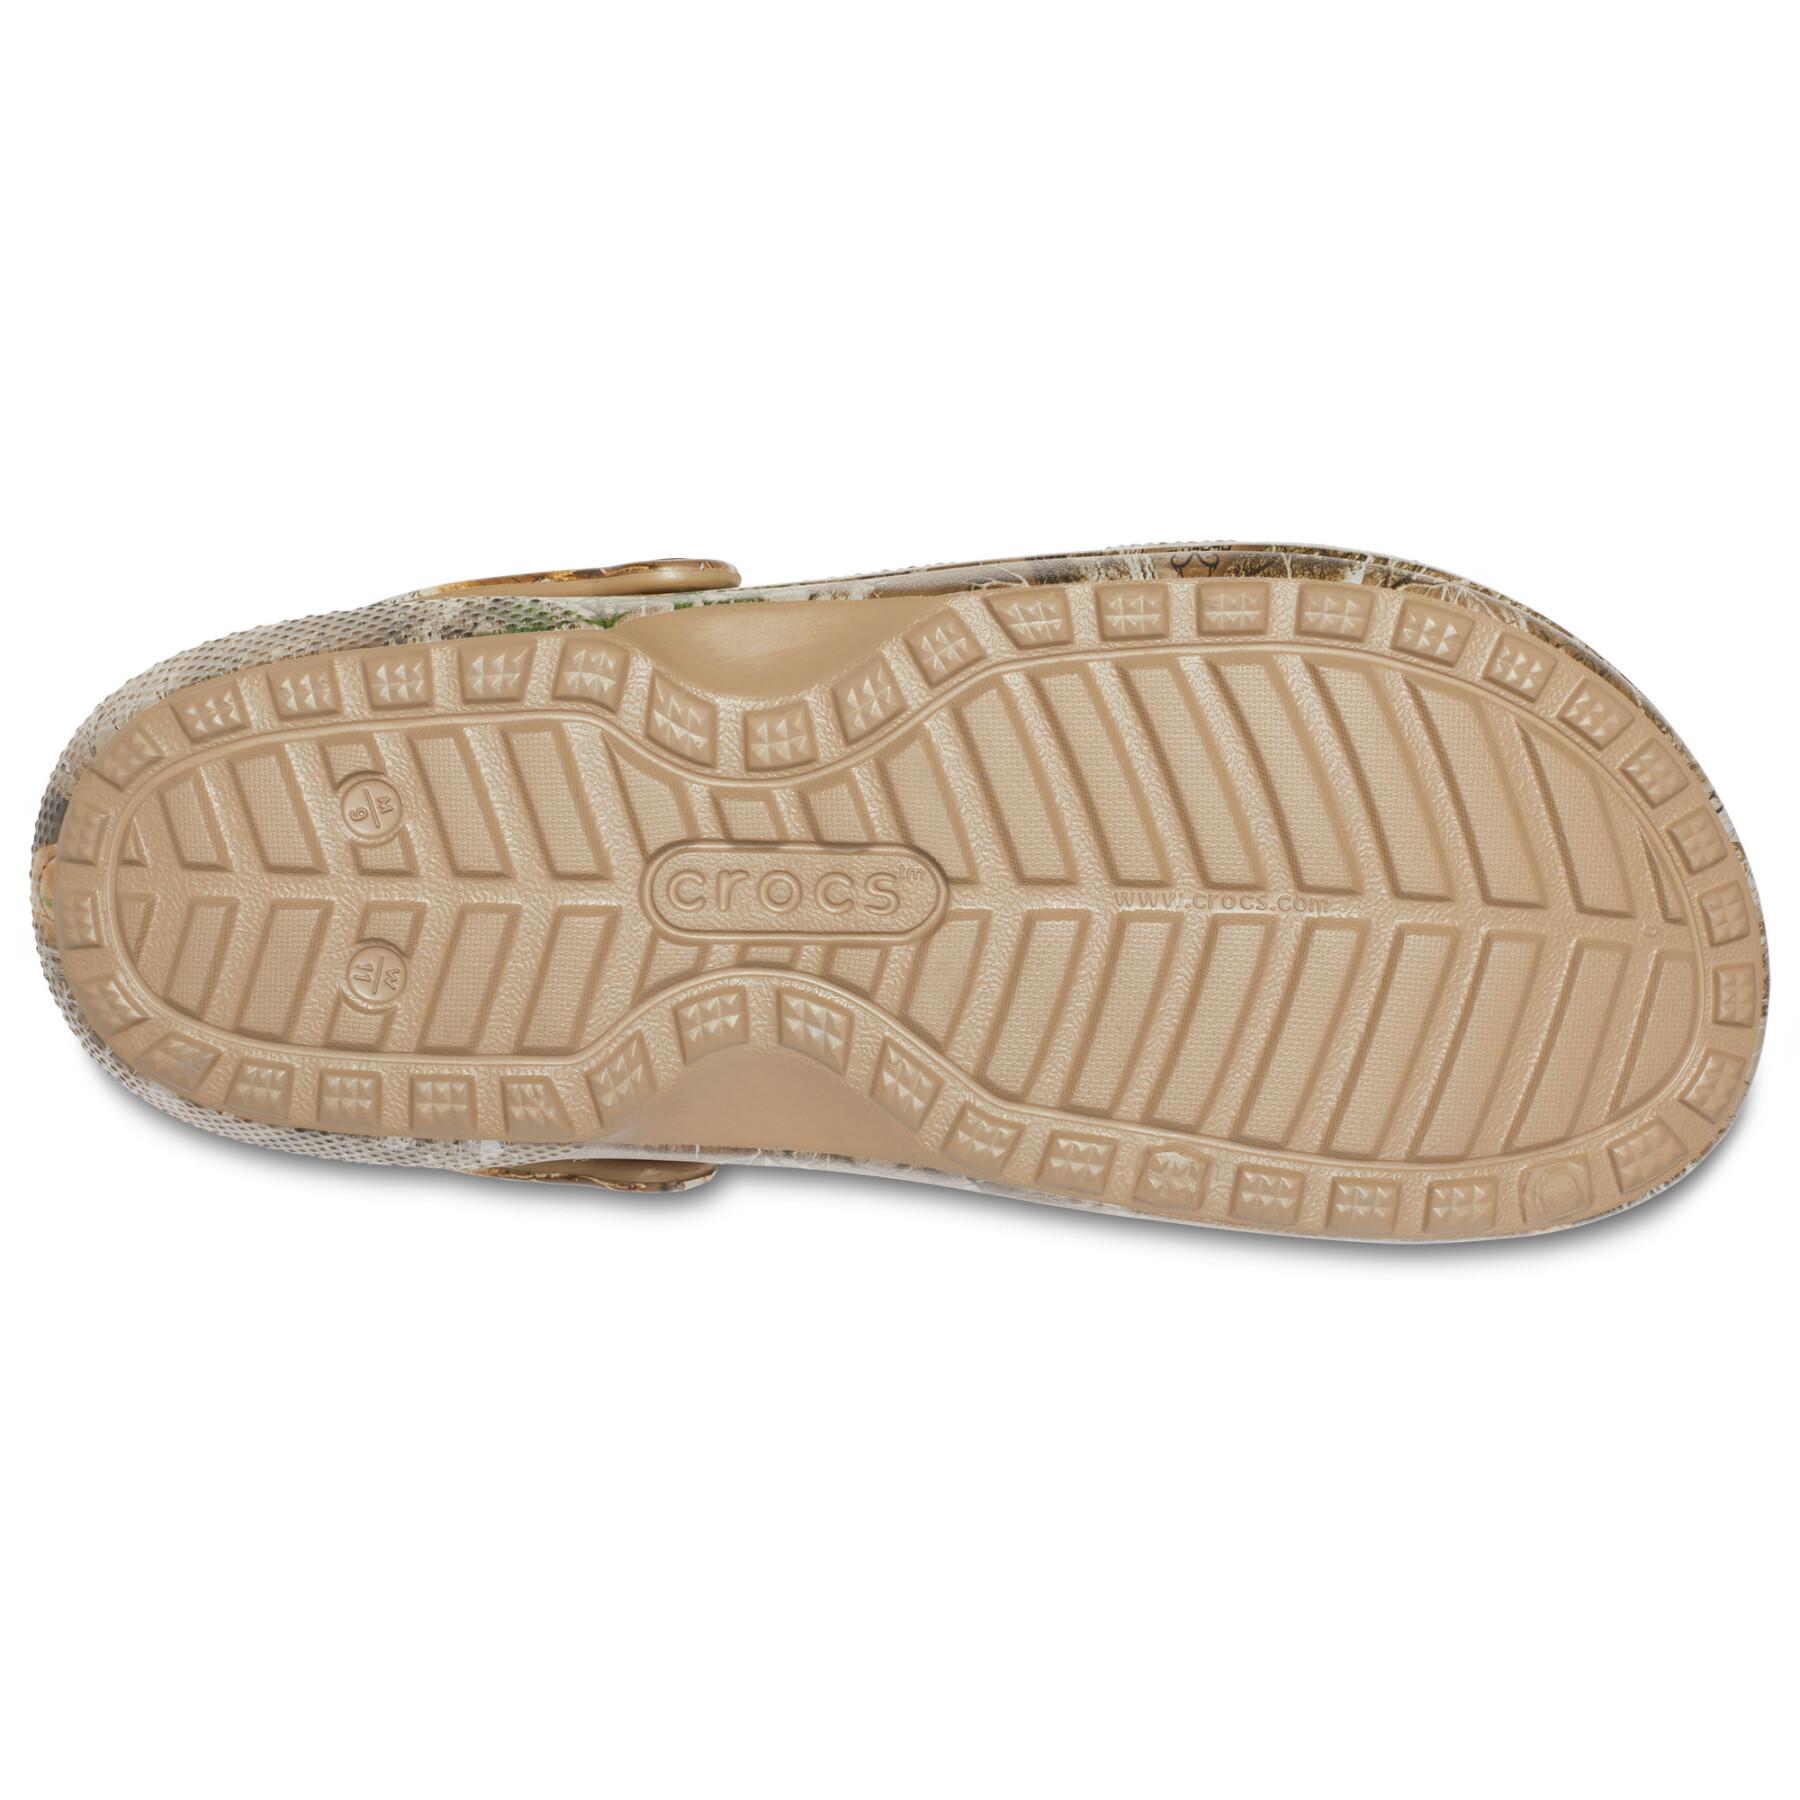 Zuecos Crocs Clssc Lined Realtree Edge Clog